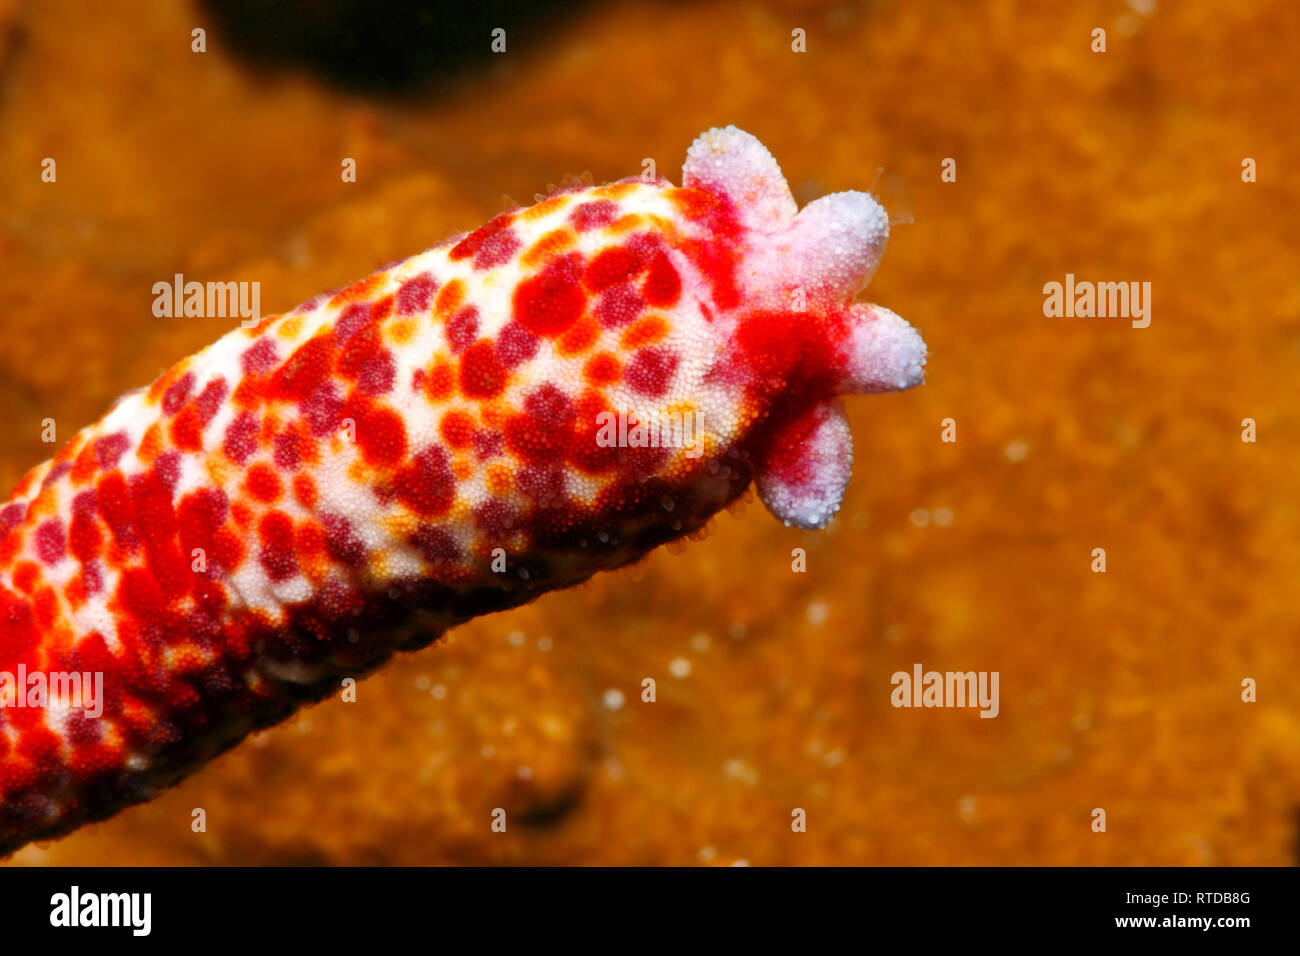 Comet Sea Star, Linckia multifora, showing a four arm regeneration growing from the stump of a 'parent' arm. See below for more information. Stock Photo